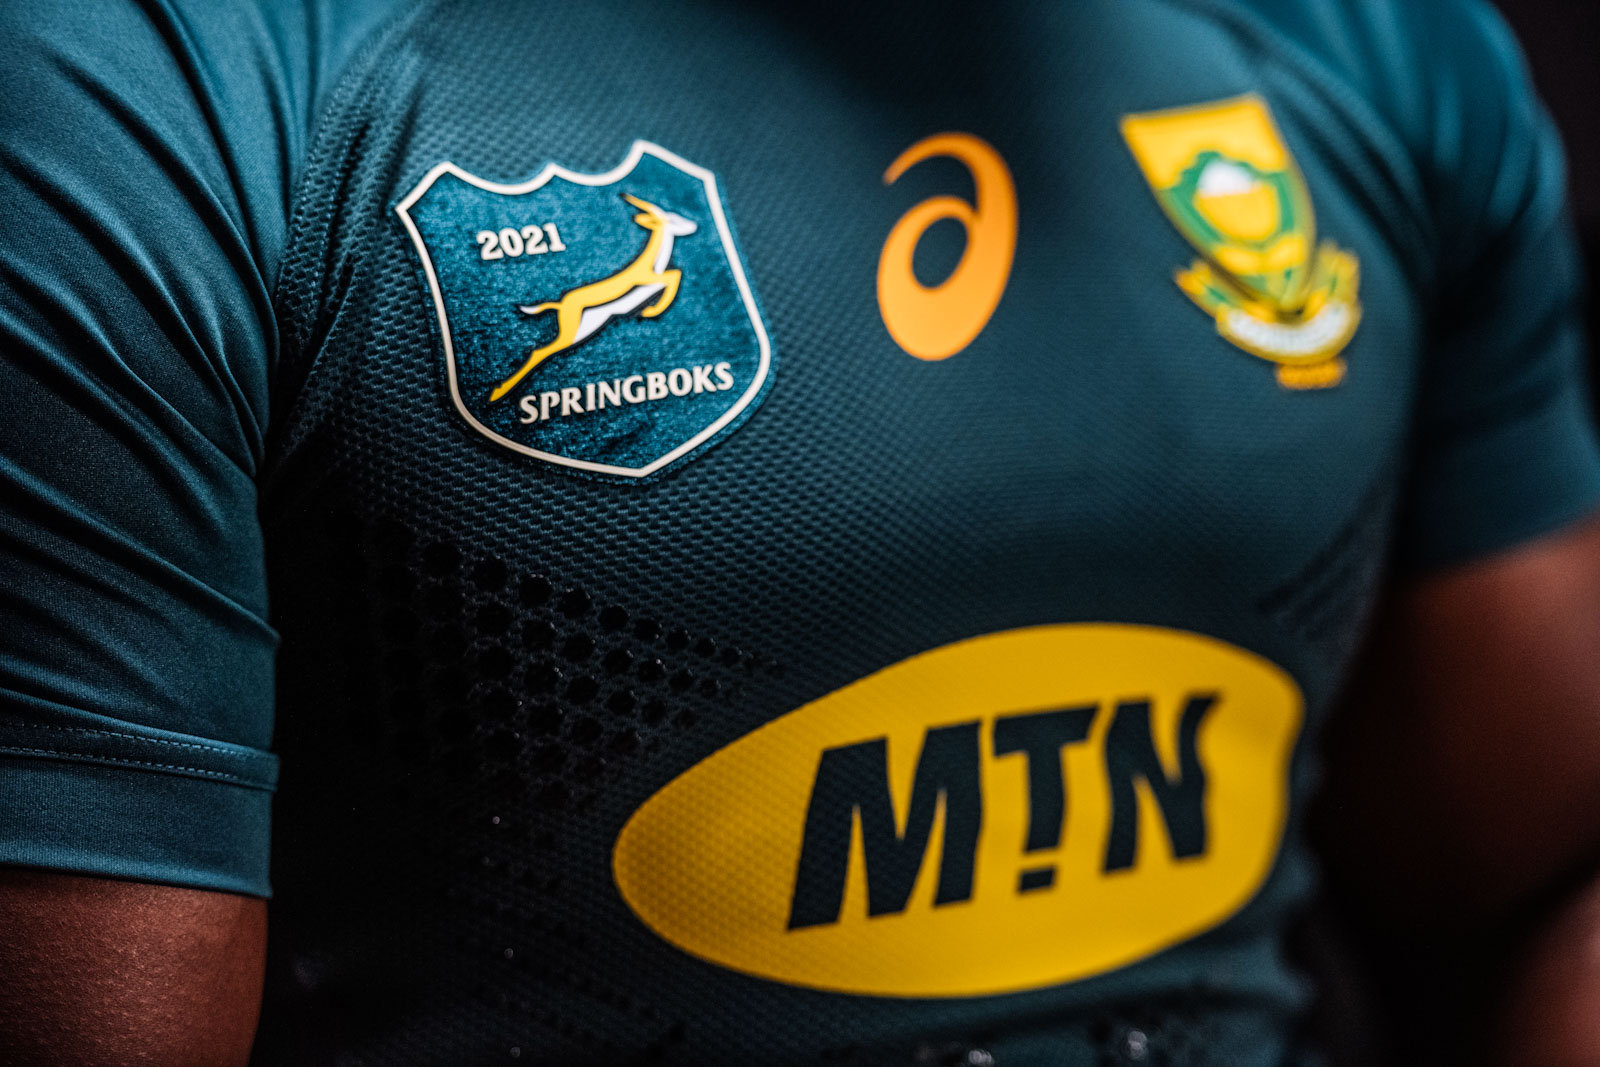 It’s Go Time as Boks and MTN renew partnership | SA Rugby